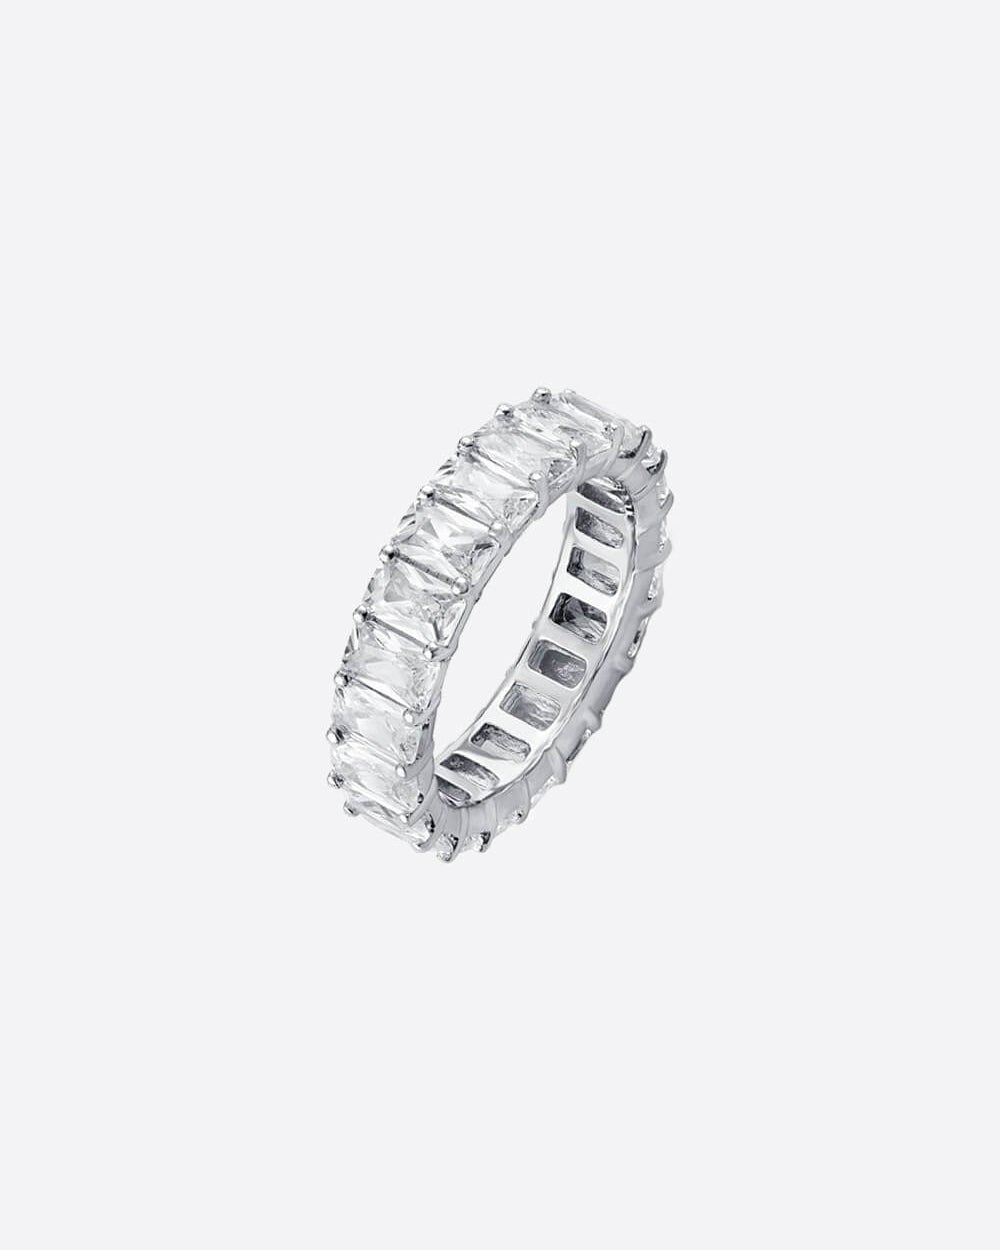 CLARITY RING. - WHITE GOLD